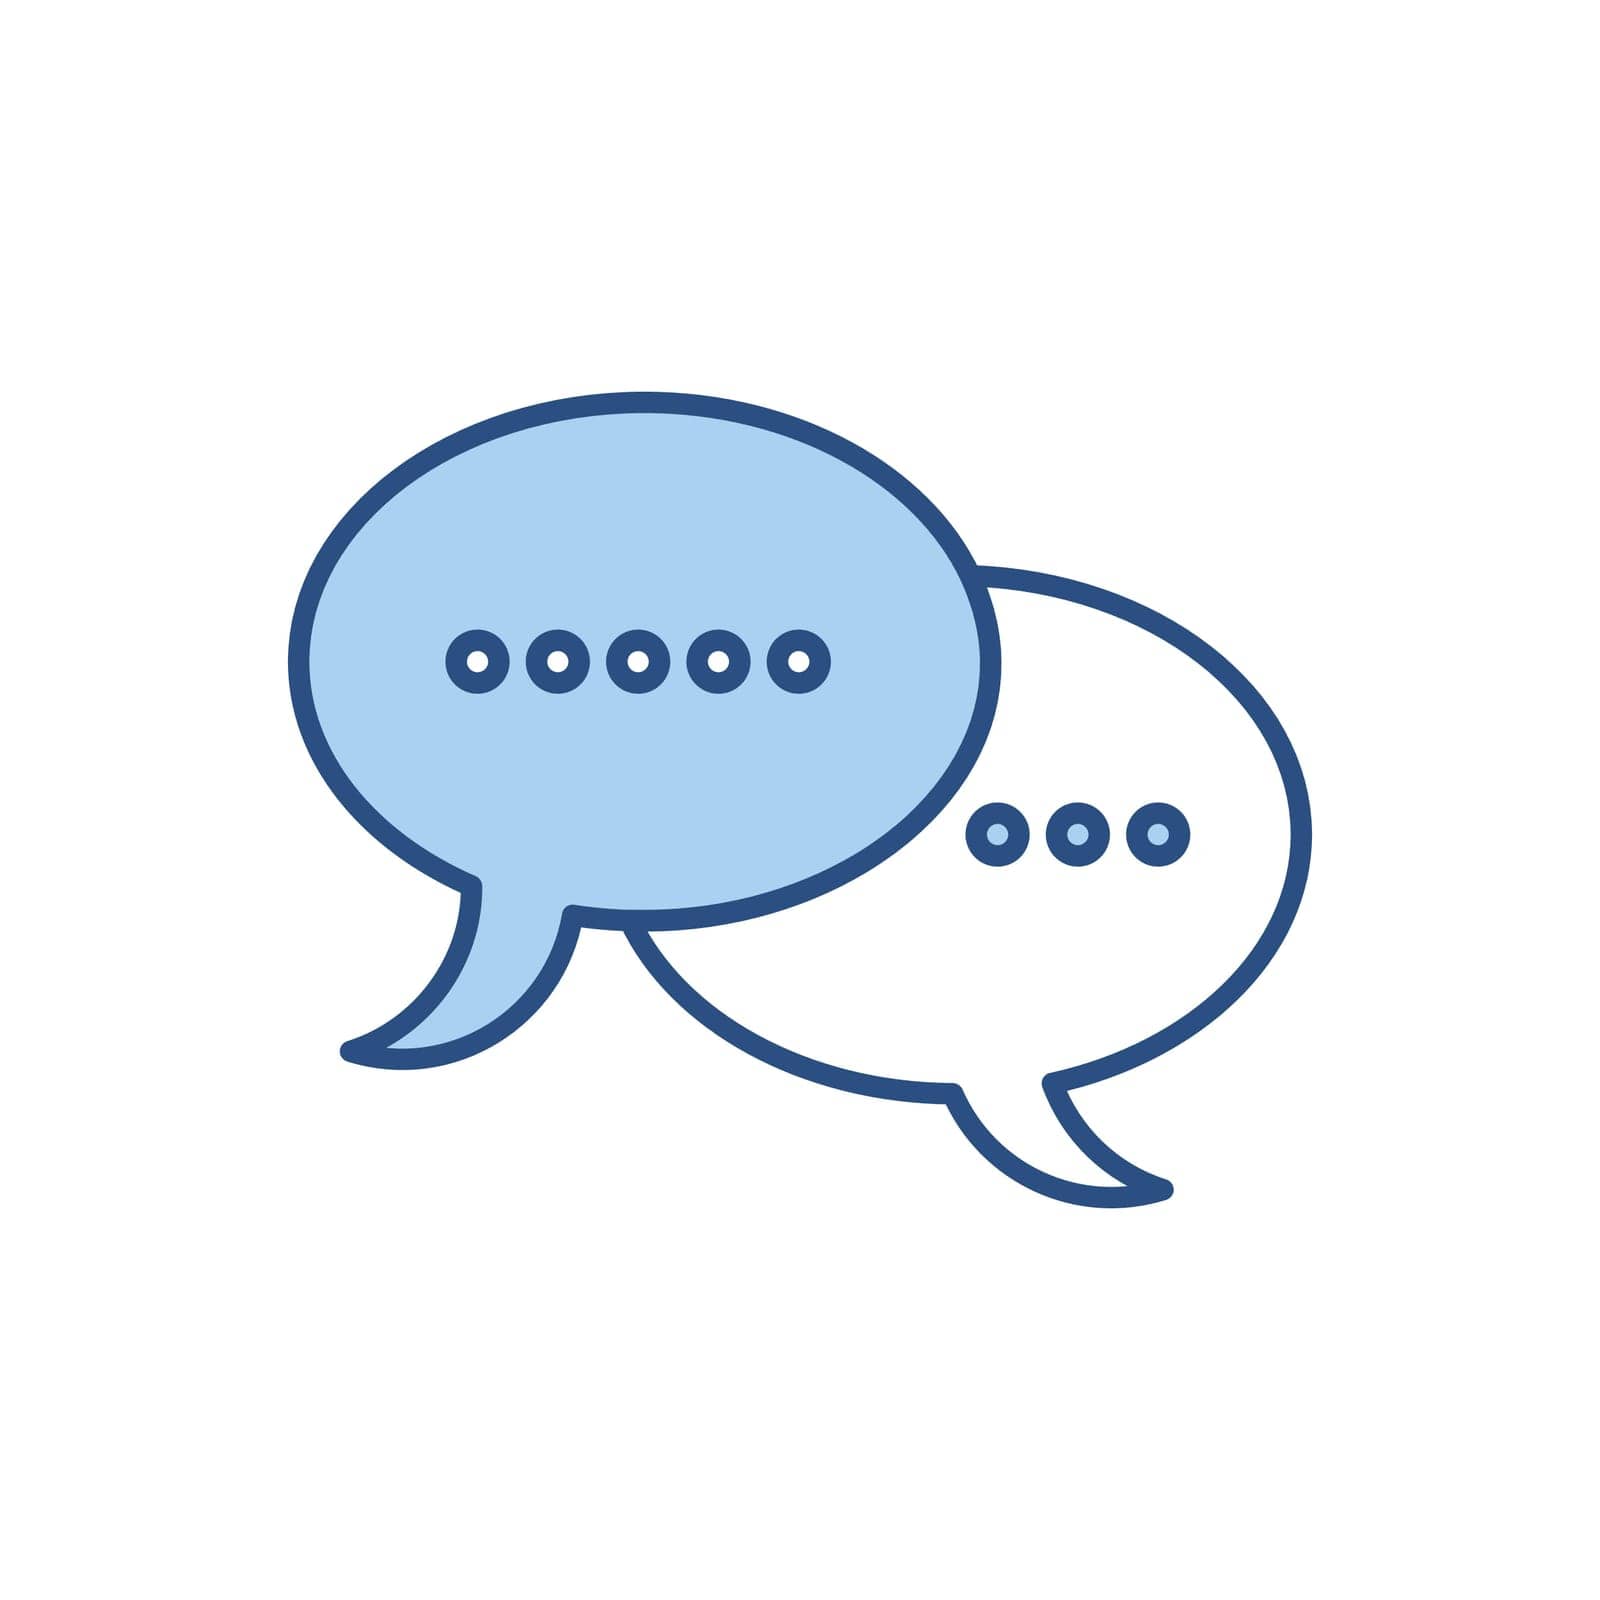 Speech Bubble related vector icon. Isolated on white background. Vector illustration